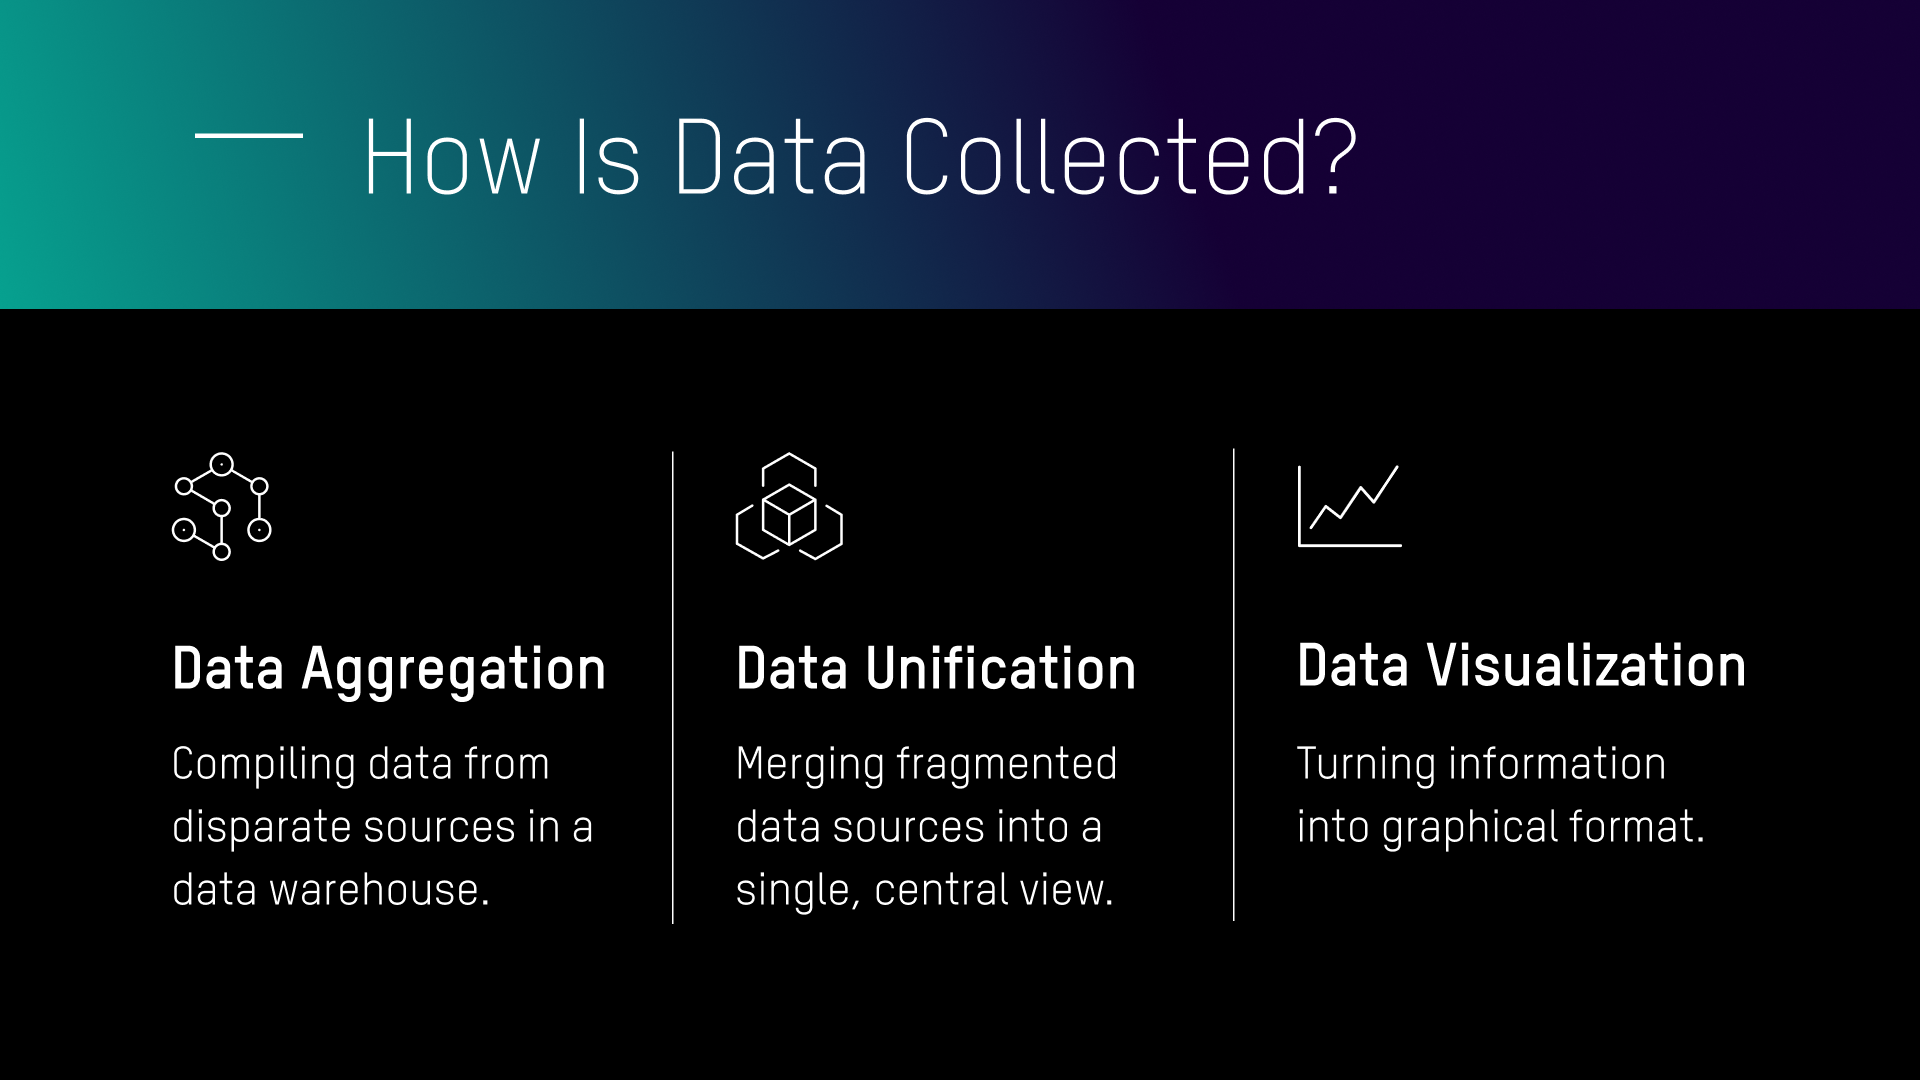 How is data collected?